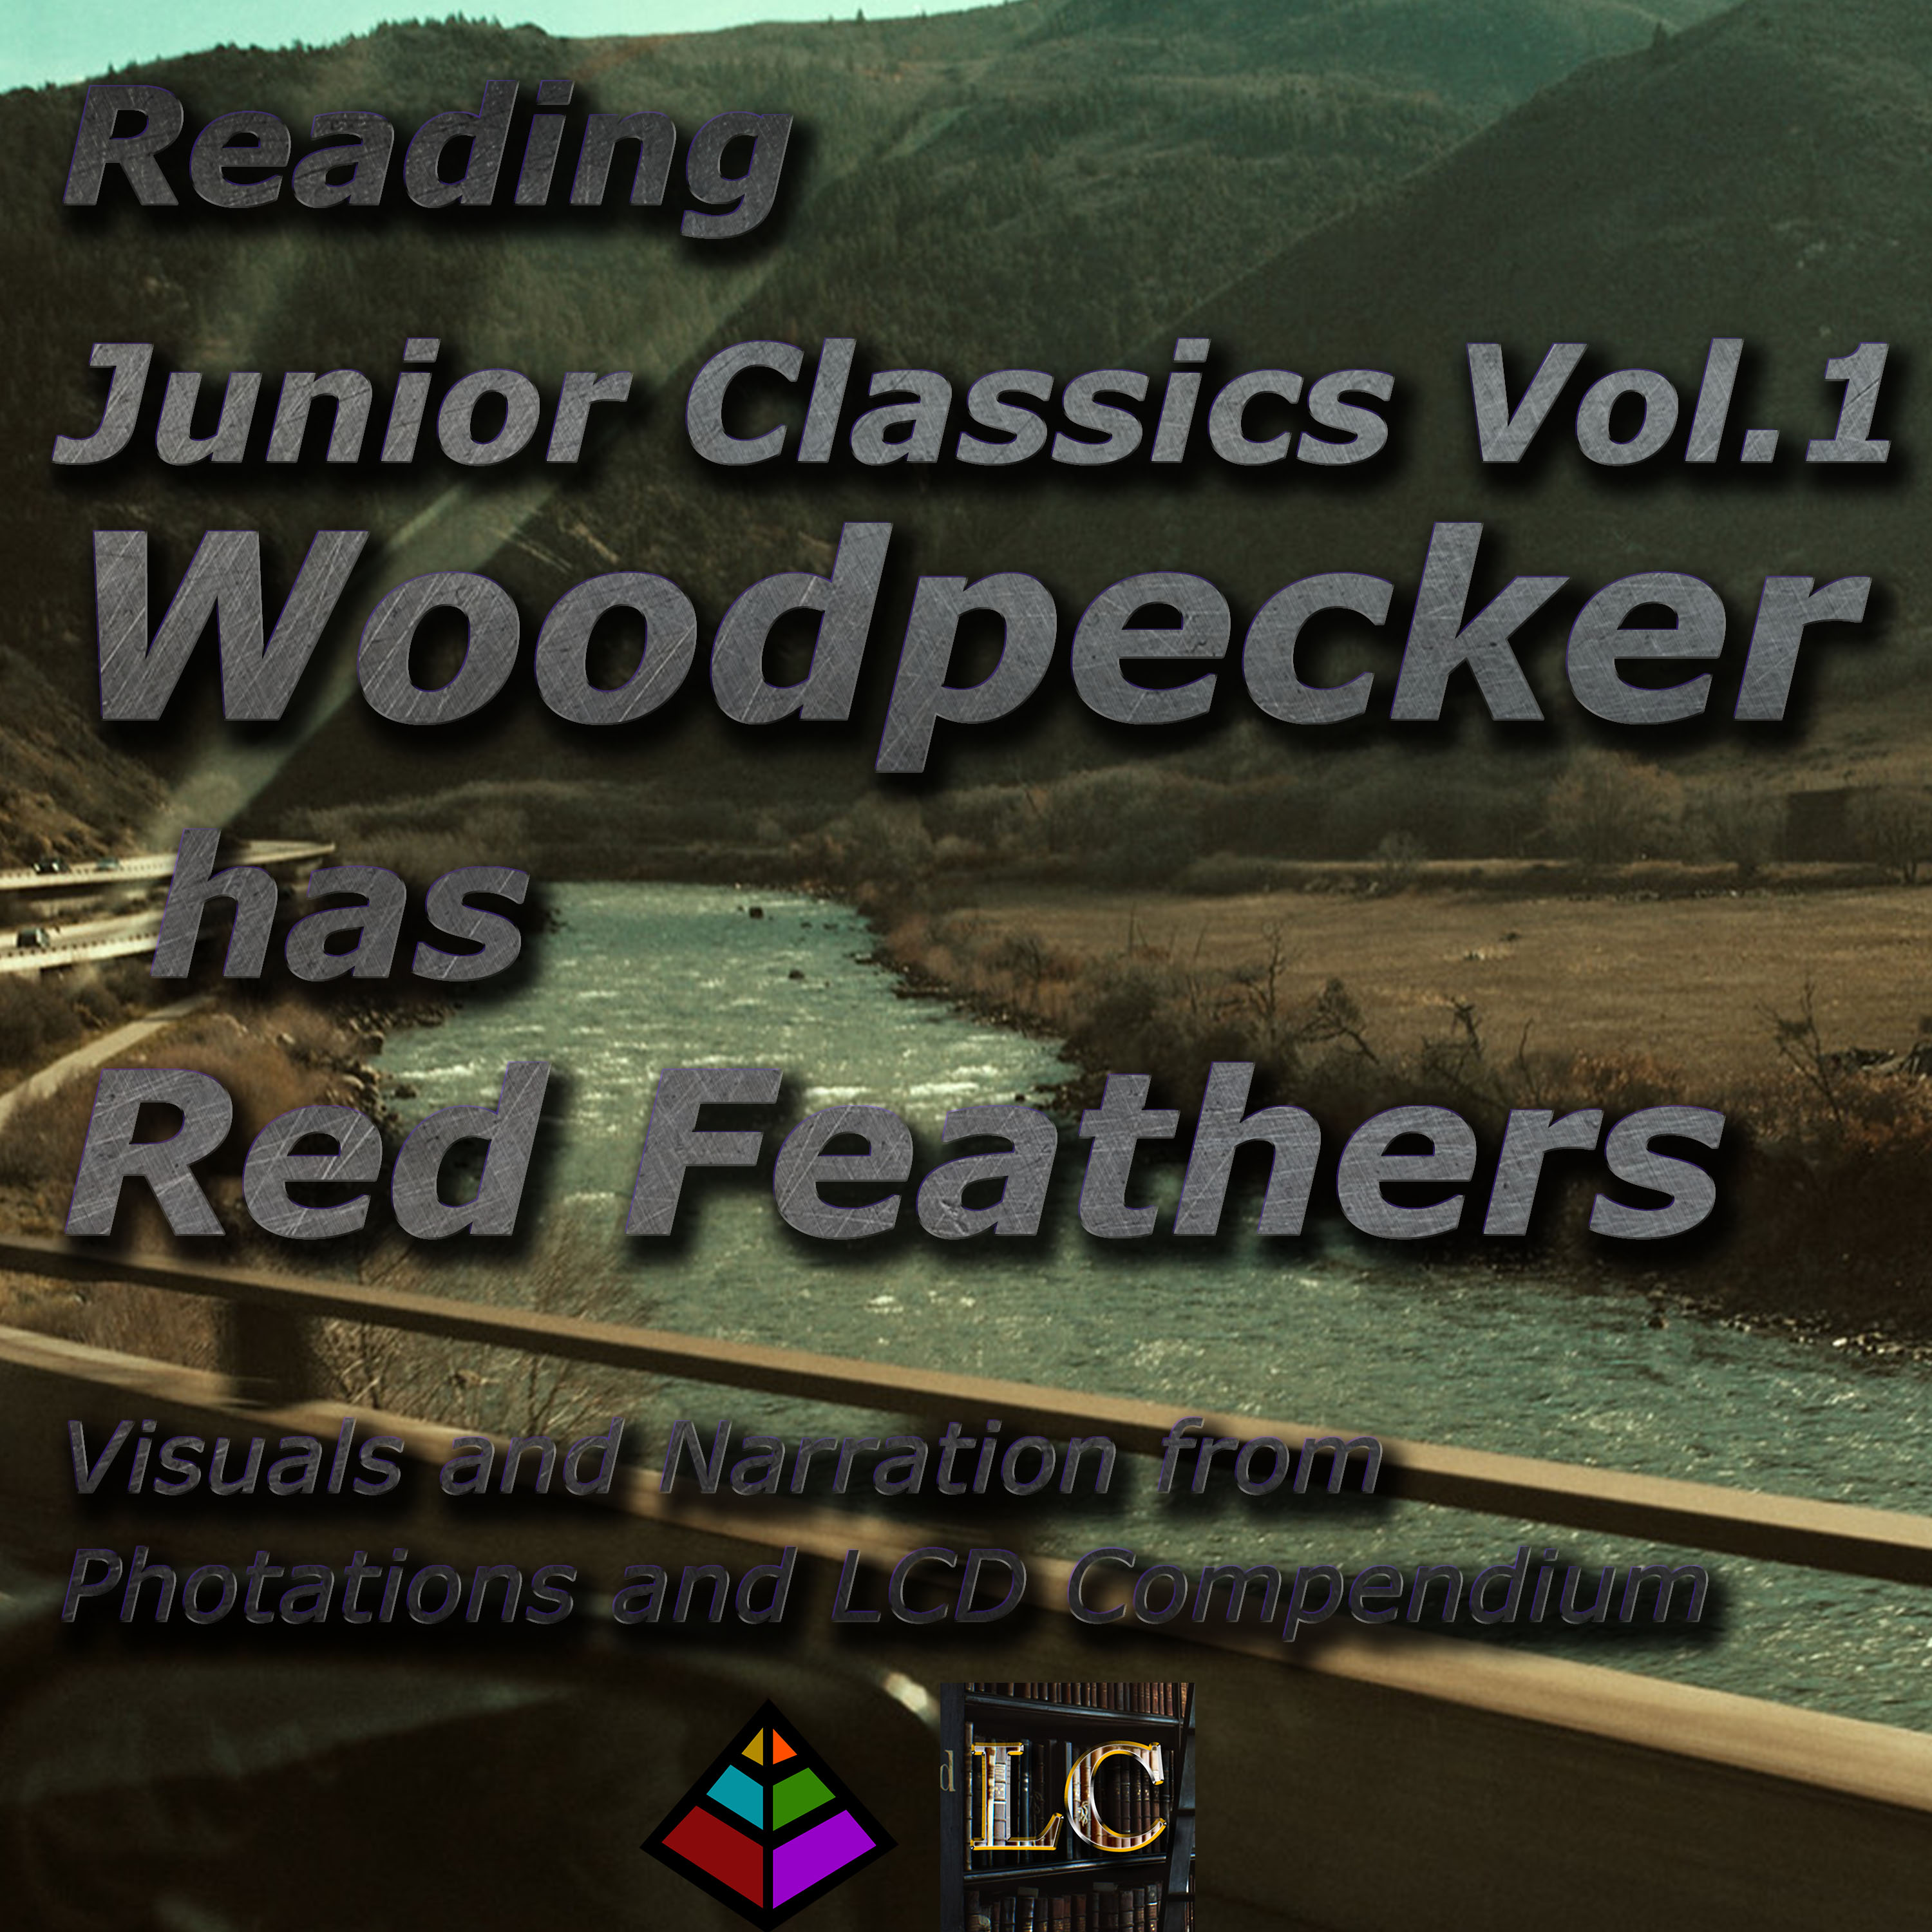 Junior Classics Vol 1 02 Why the Woodpecker has Red Feathers